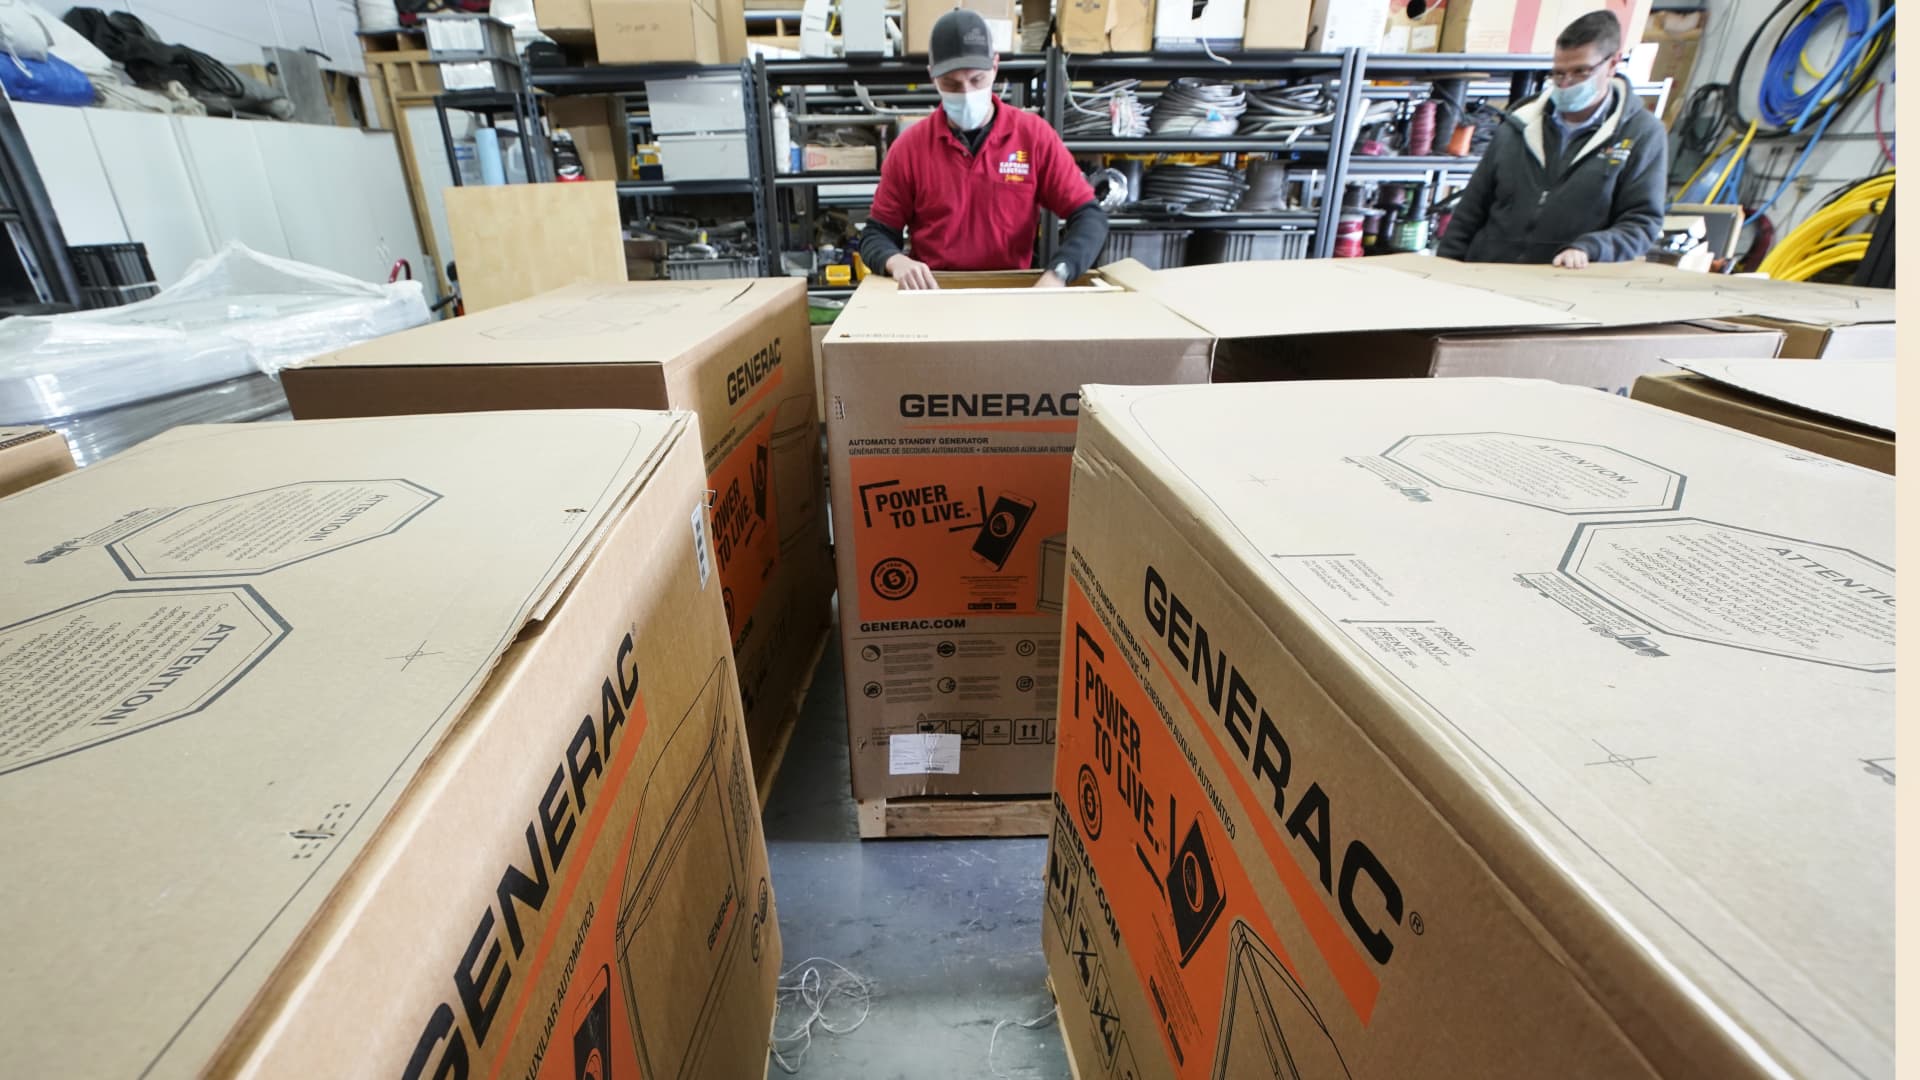 UBS says Generac is a top pick with more than 80% upside